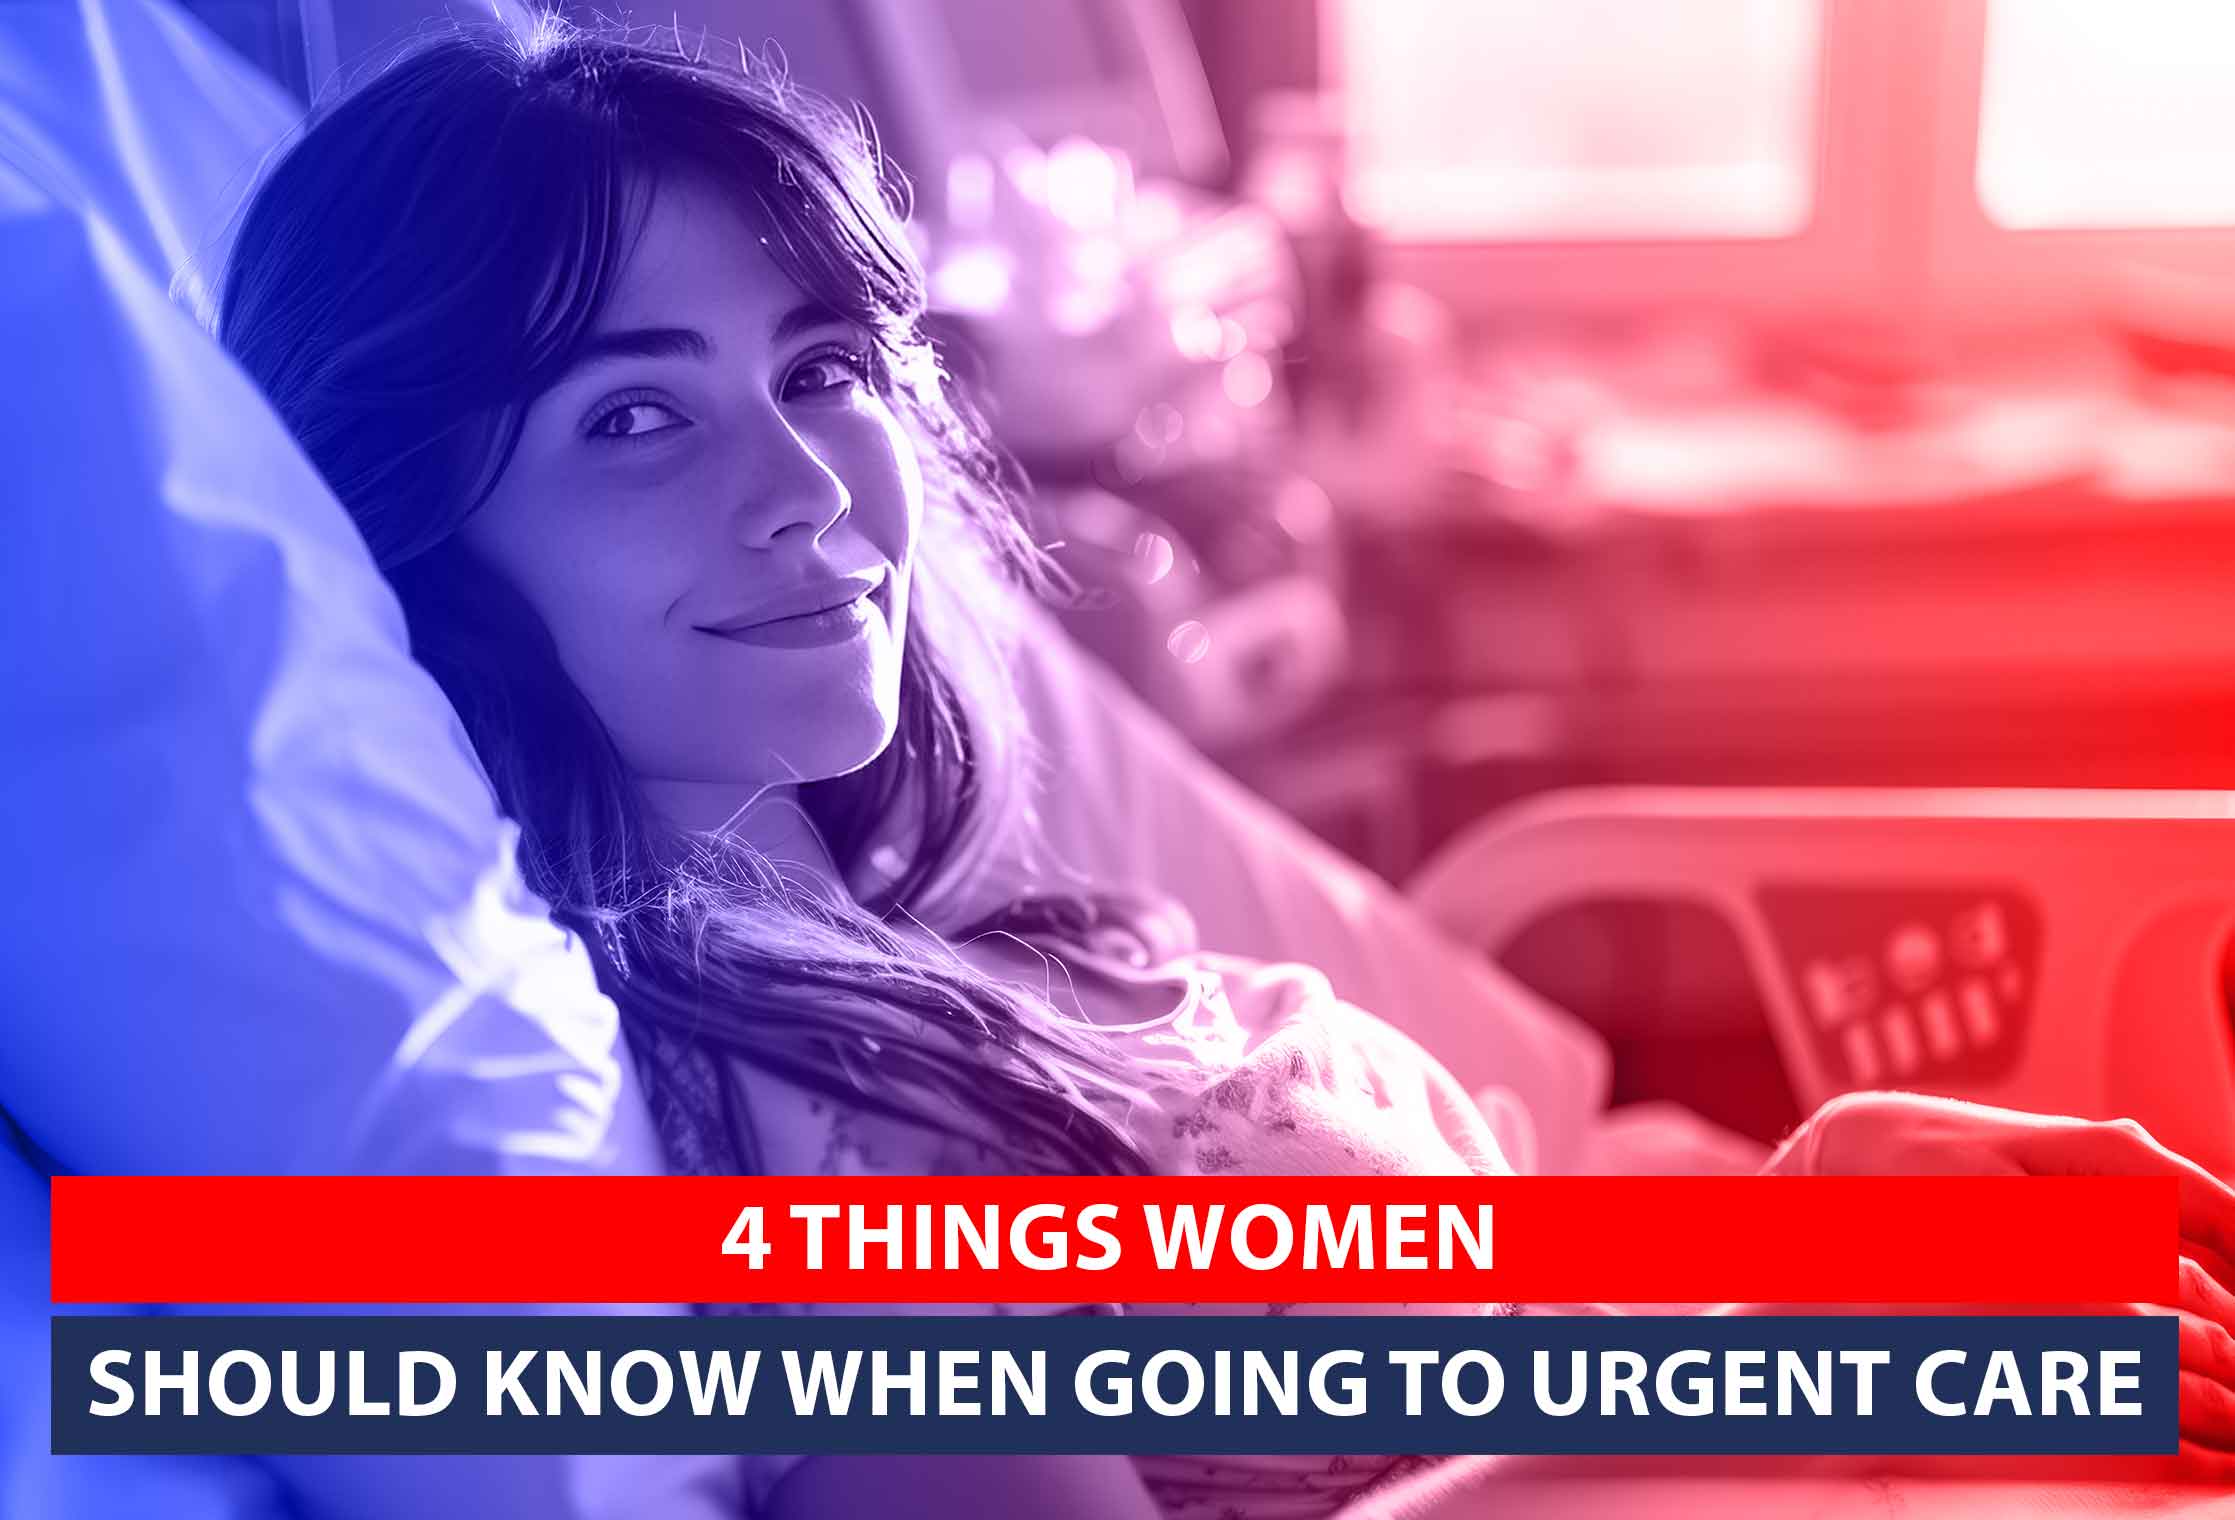 Discover the 4-things-women-should-know-when-going-to-urgent-care. Stay informed and prepared for effective and timely urgent care.